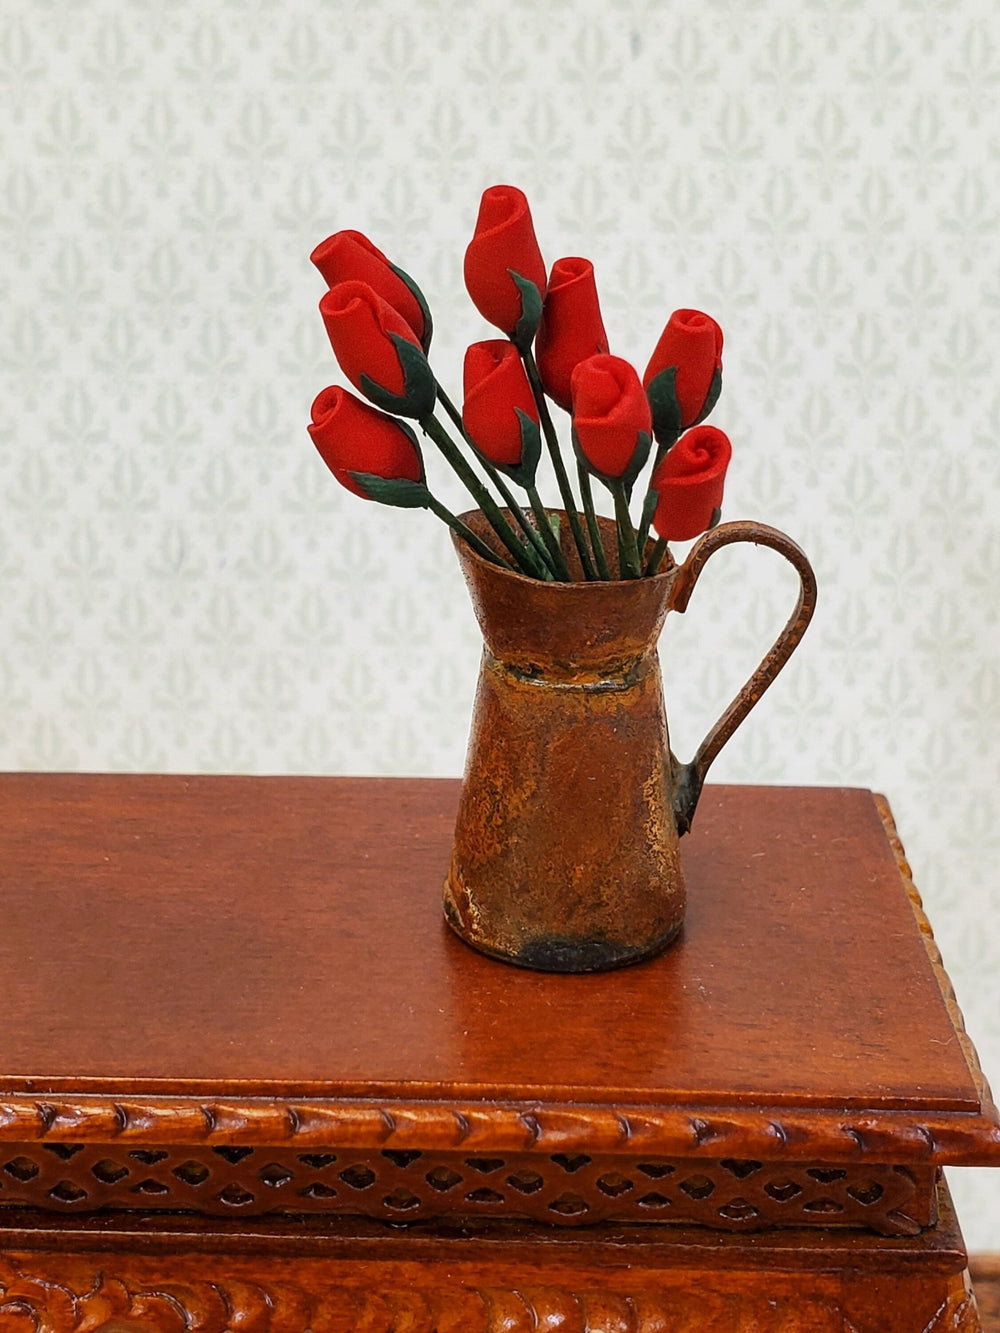 Dollhouse Red Rose Buds Flowers Set of 10 with Stems 1:12 Scale Miniature Garden - Miniature Crush